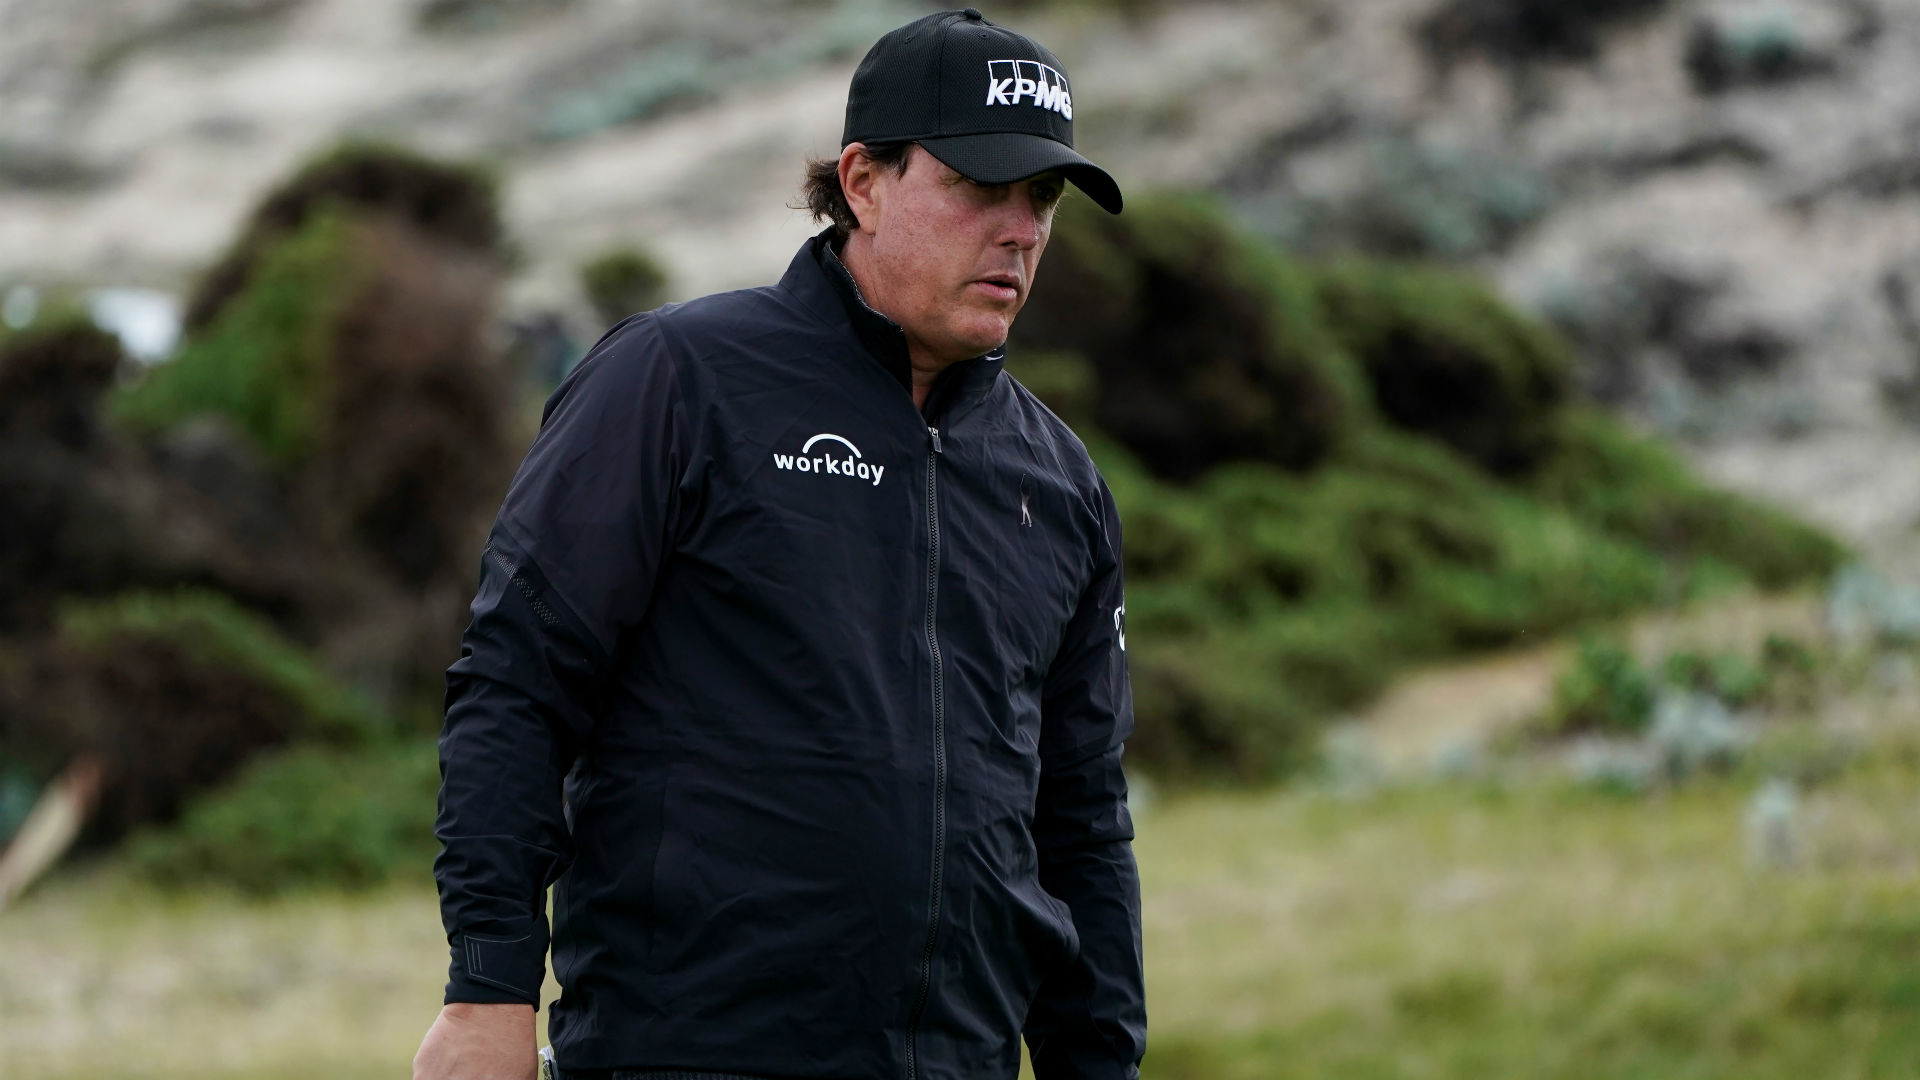 At T Pebble Beach Pro Am Phil Mickelson Shares Lead After Round